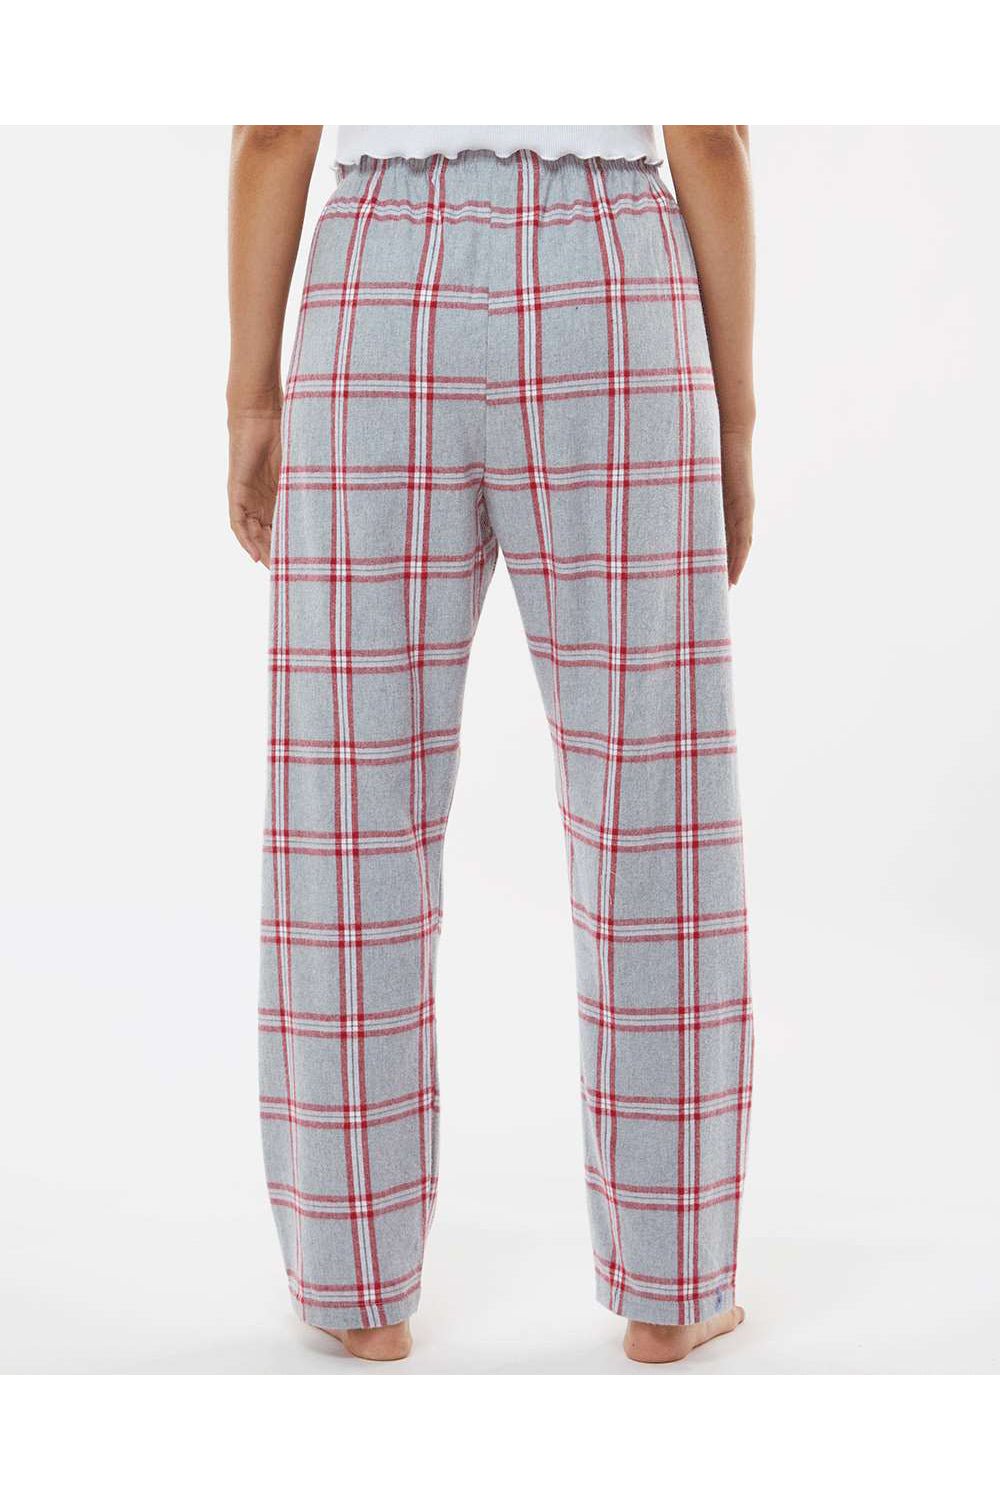 Boxercraft BW6620 Womens Haley Flannel Pants Oxford Red Tomboy Plaid Model Back